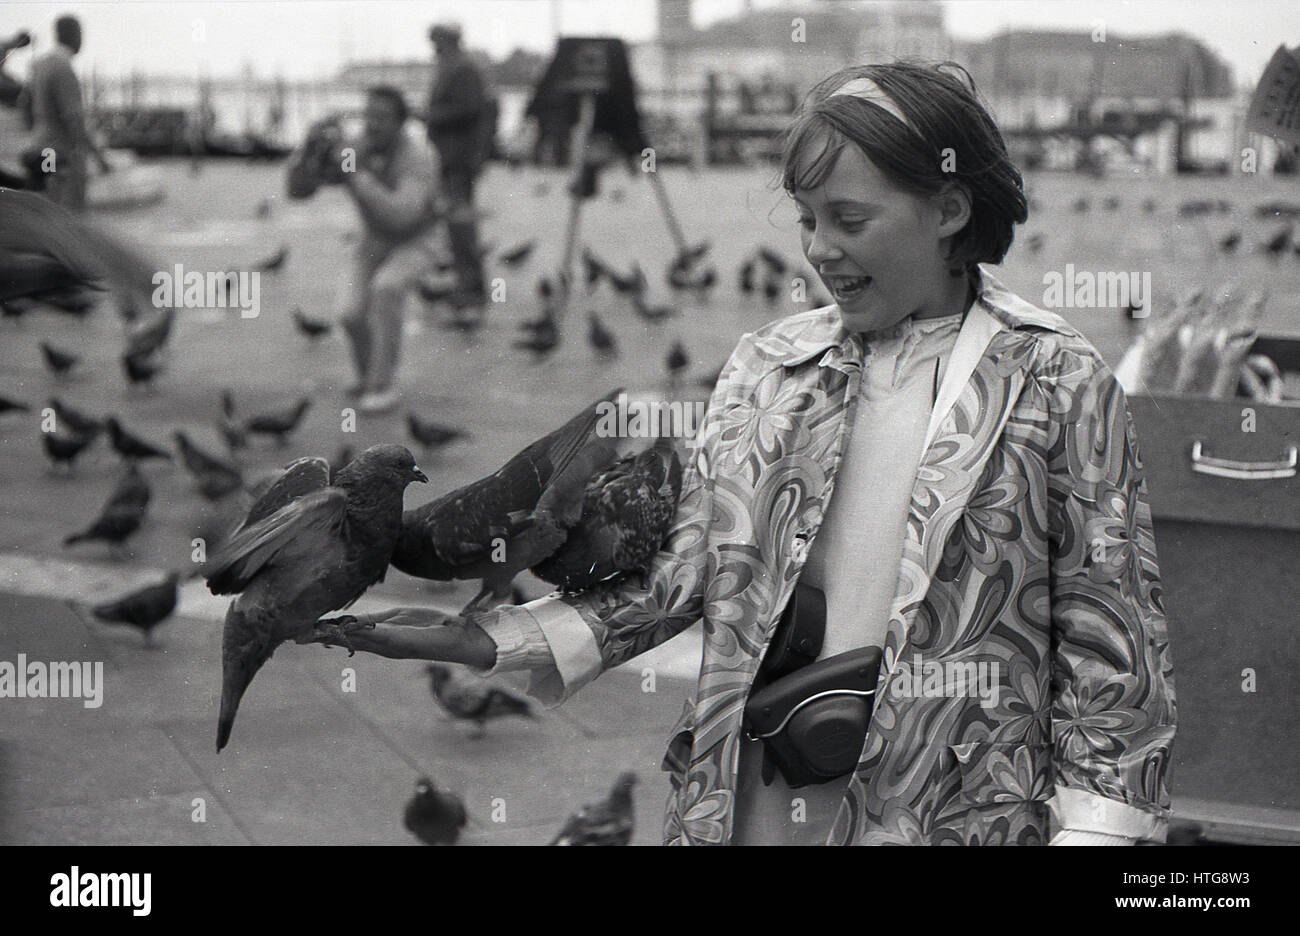 1970s, St Mark's Square. Venice, Italy, excited girl wearing a flower patterned coat standing with pigeons on her hand and arm. Stock Photo